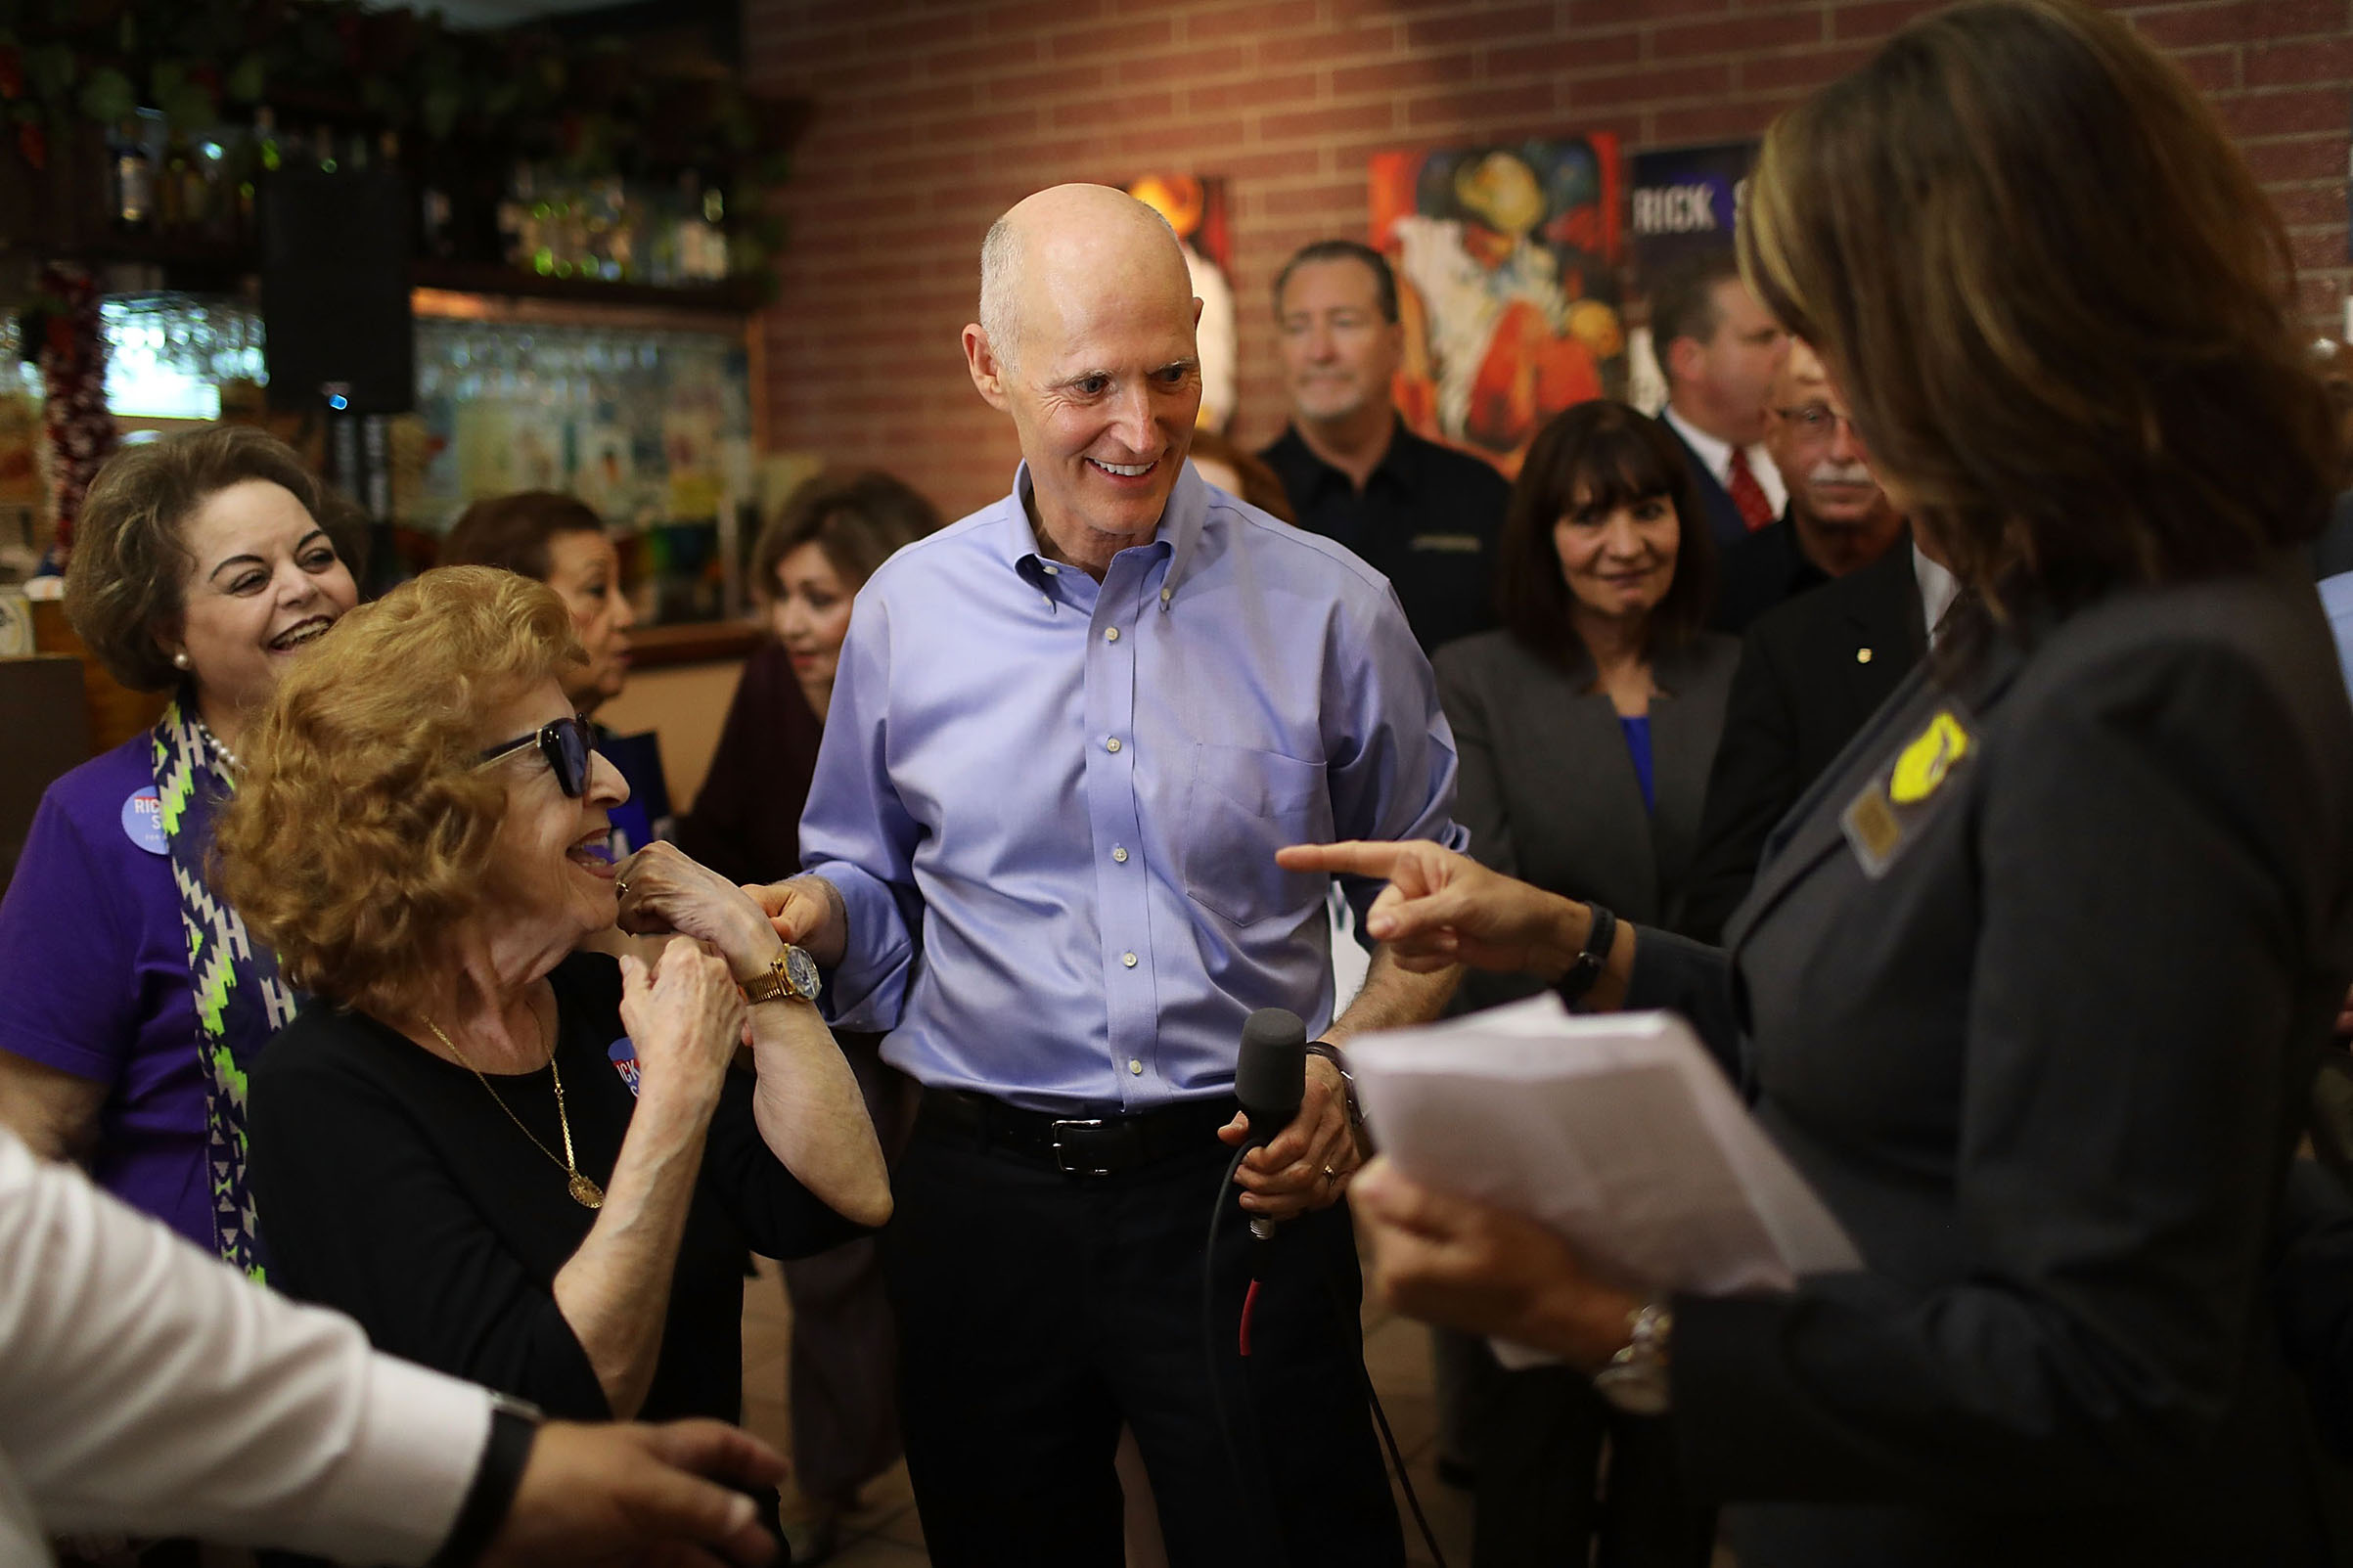 Scott greets voters on June 14 during a campaign stop at Chico’s Restaurant in Hialeah, Fla. (Joe Raedle—Getty Images)